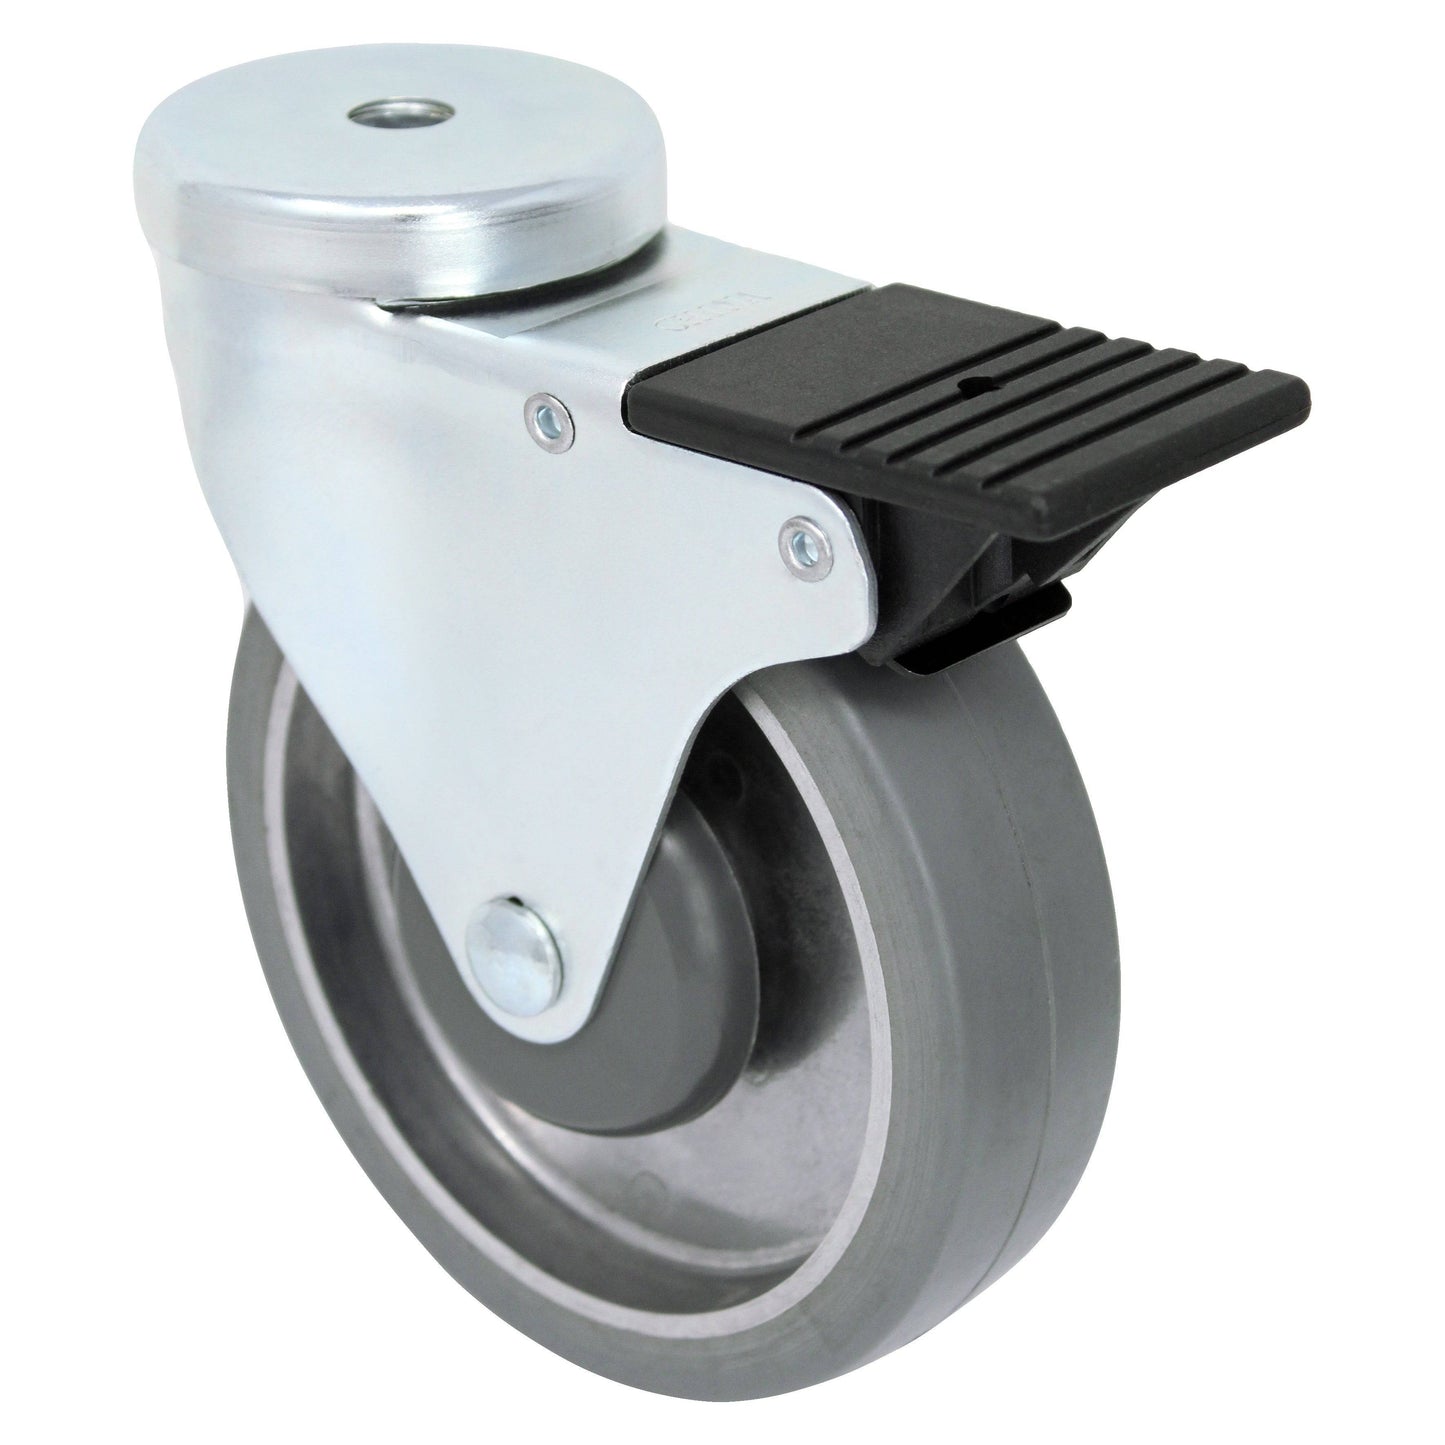 5" x 1-1/4" Mold-On Rubber Aluminum Wheel Swivel Stemless Caster w/ Total Lock Brake- 250 lbs. capacity - Durable Superior Casters